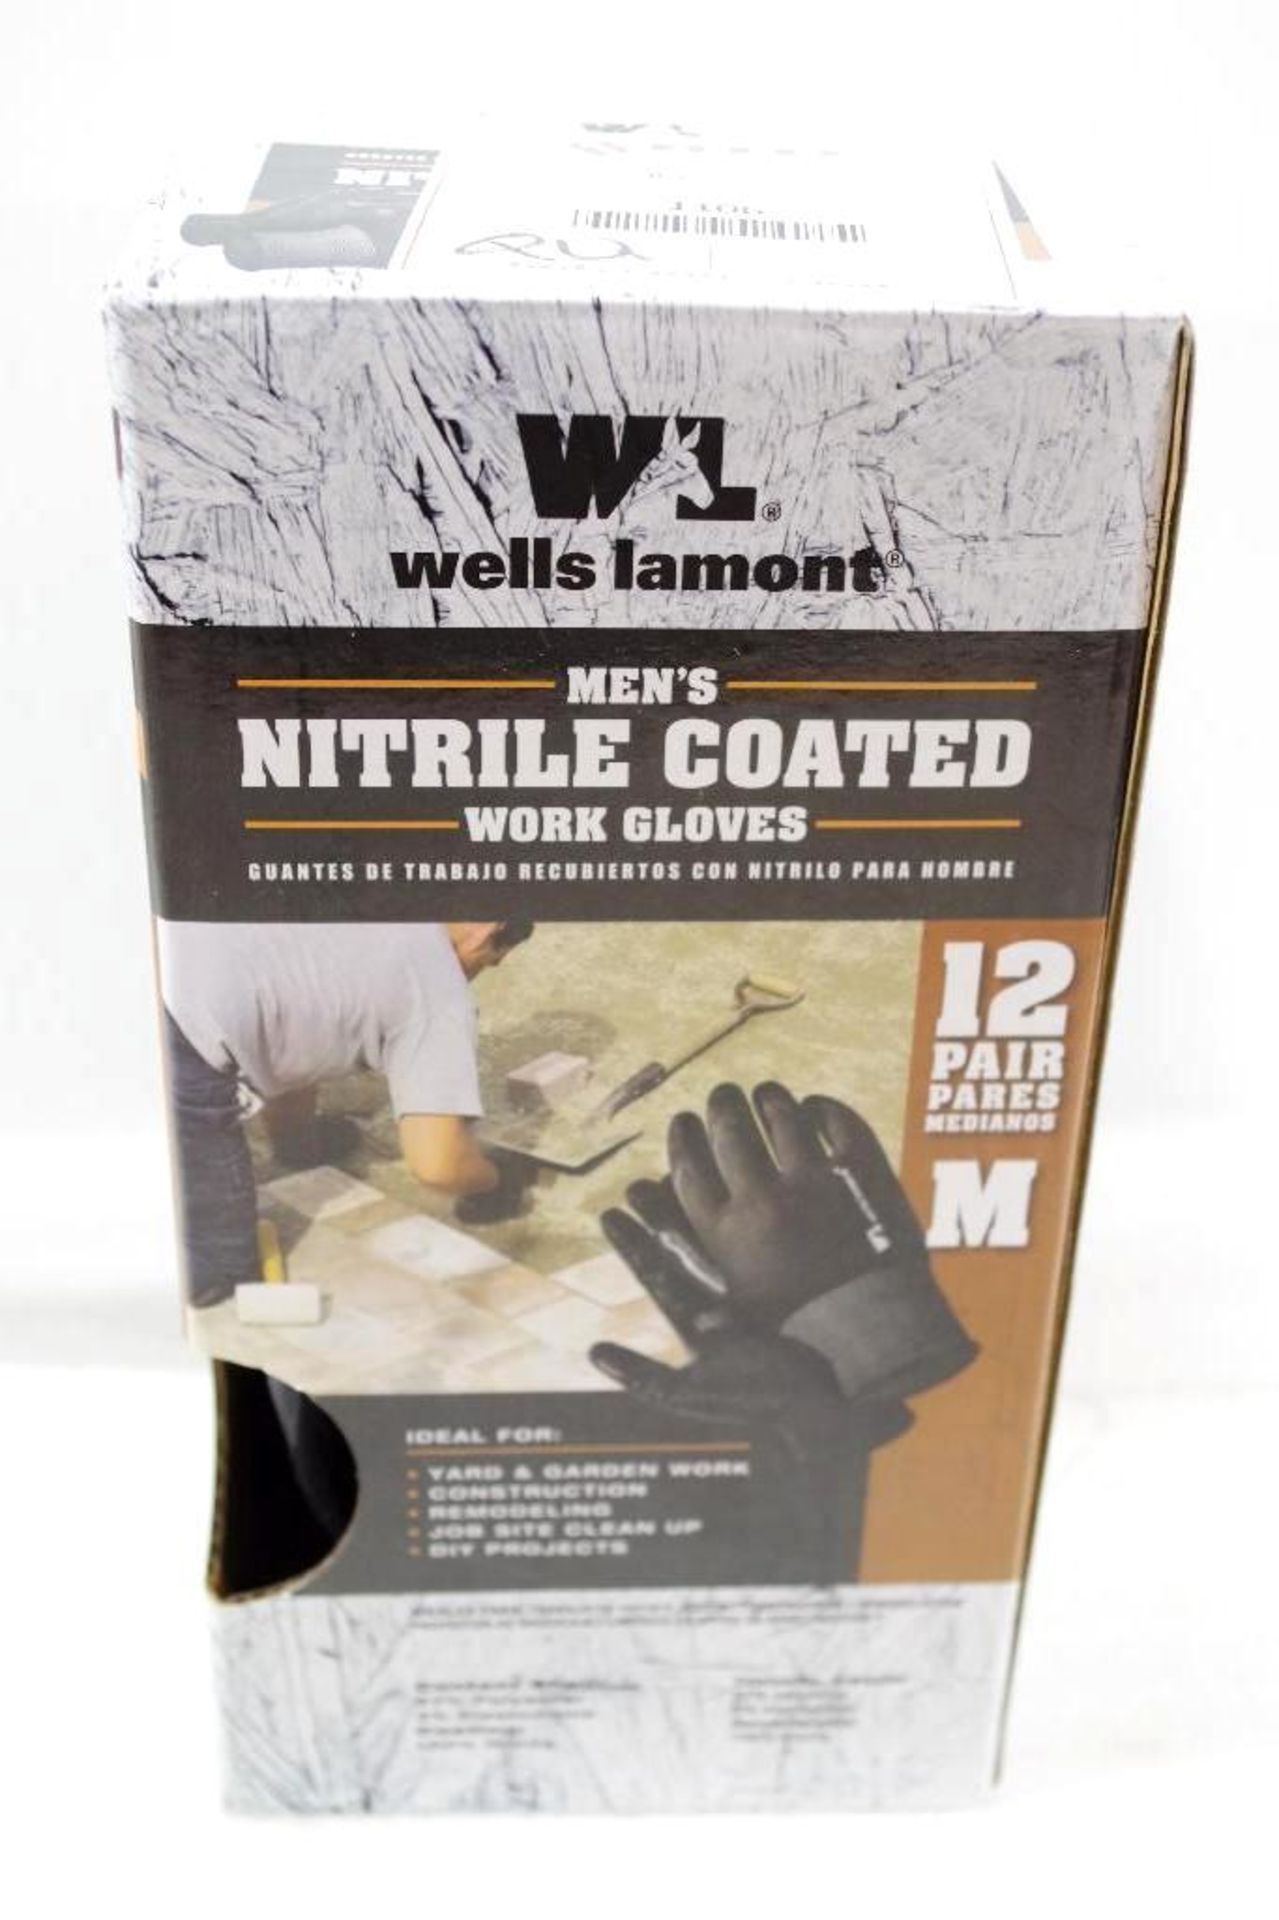 NEW WELLS LAMONT 12 Pairs Men's Nitrile Coated Work Gloves Size: M - Image 2 of 3